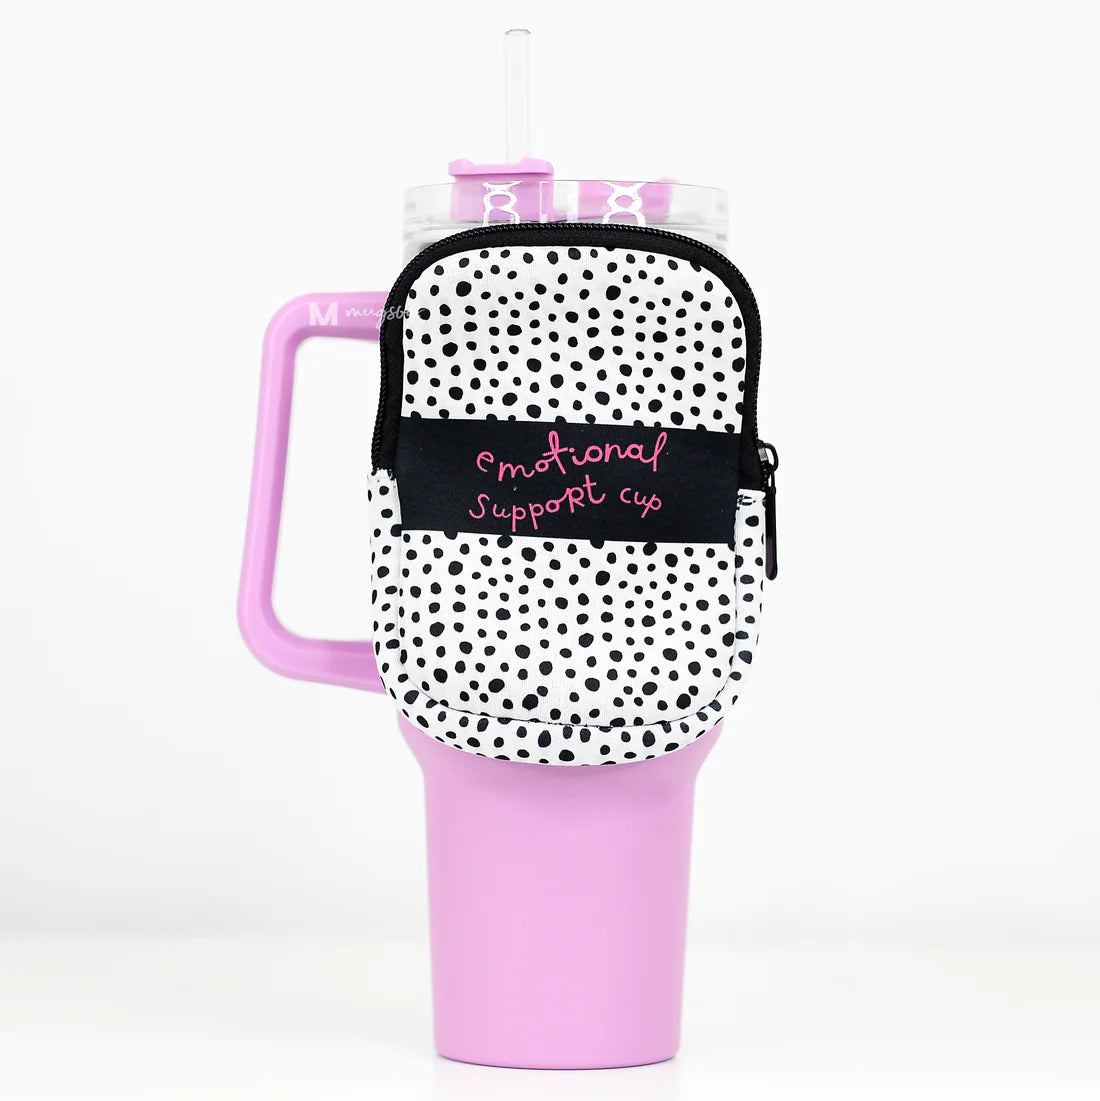 Emotional Support Cup Backpack - Glamfetti